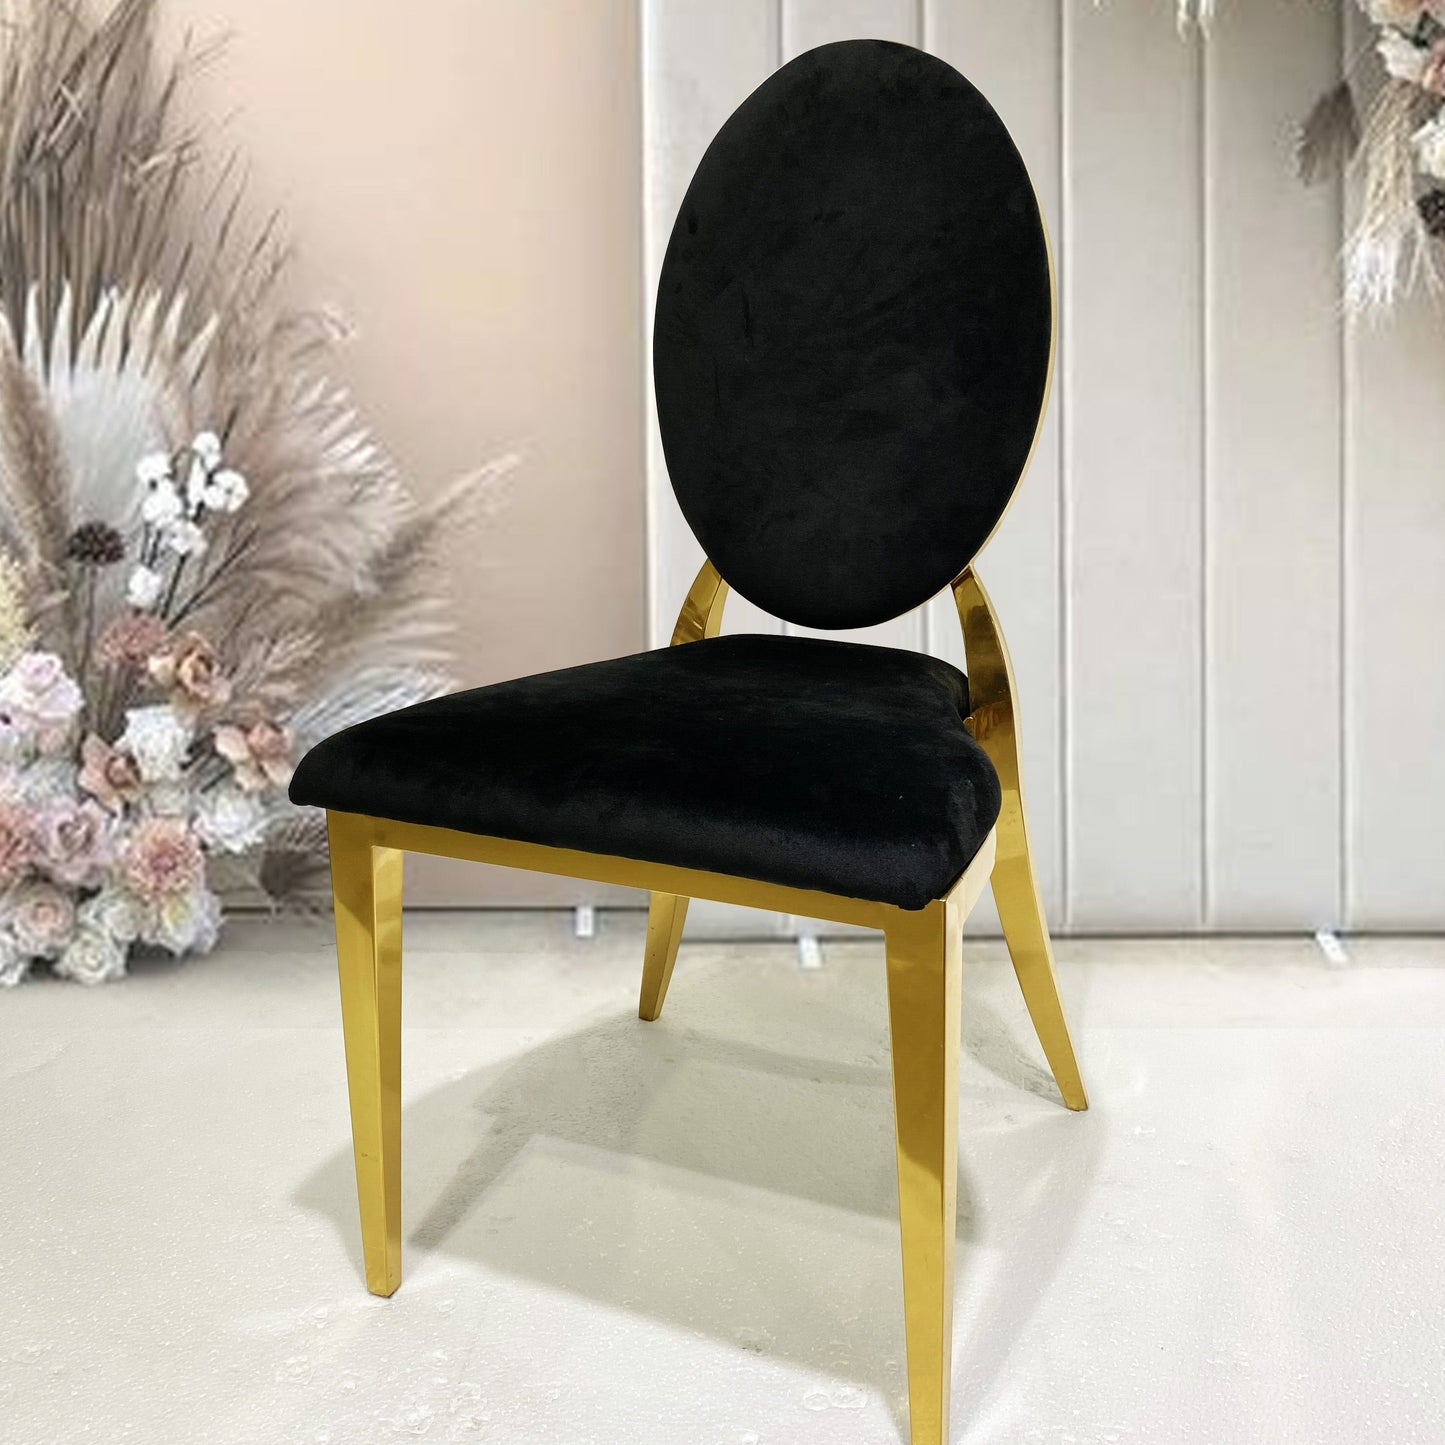 Classy Boujee Chair